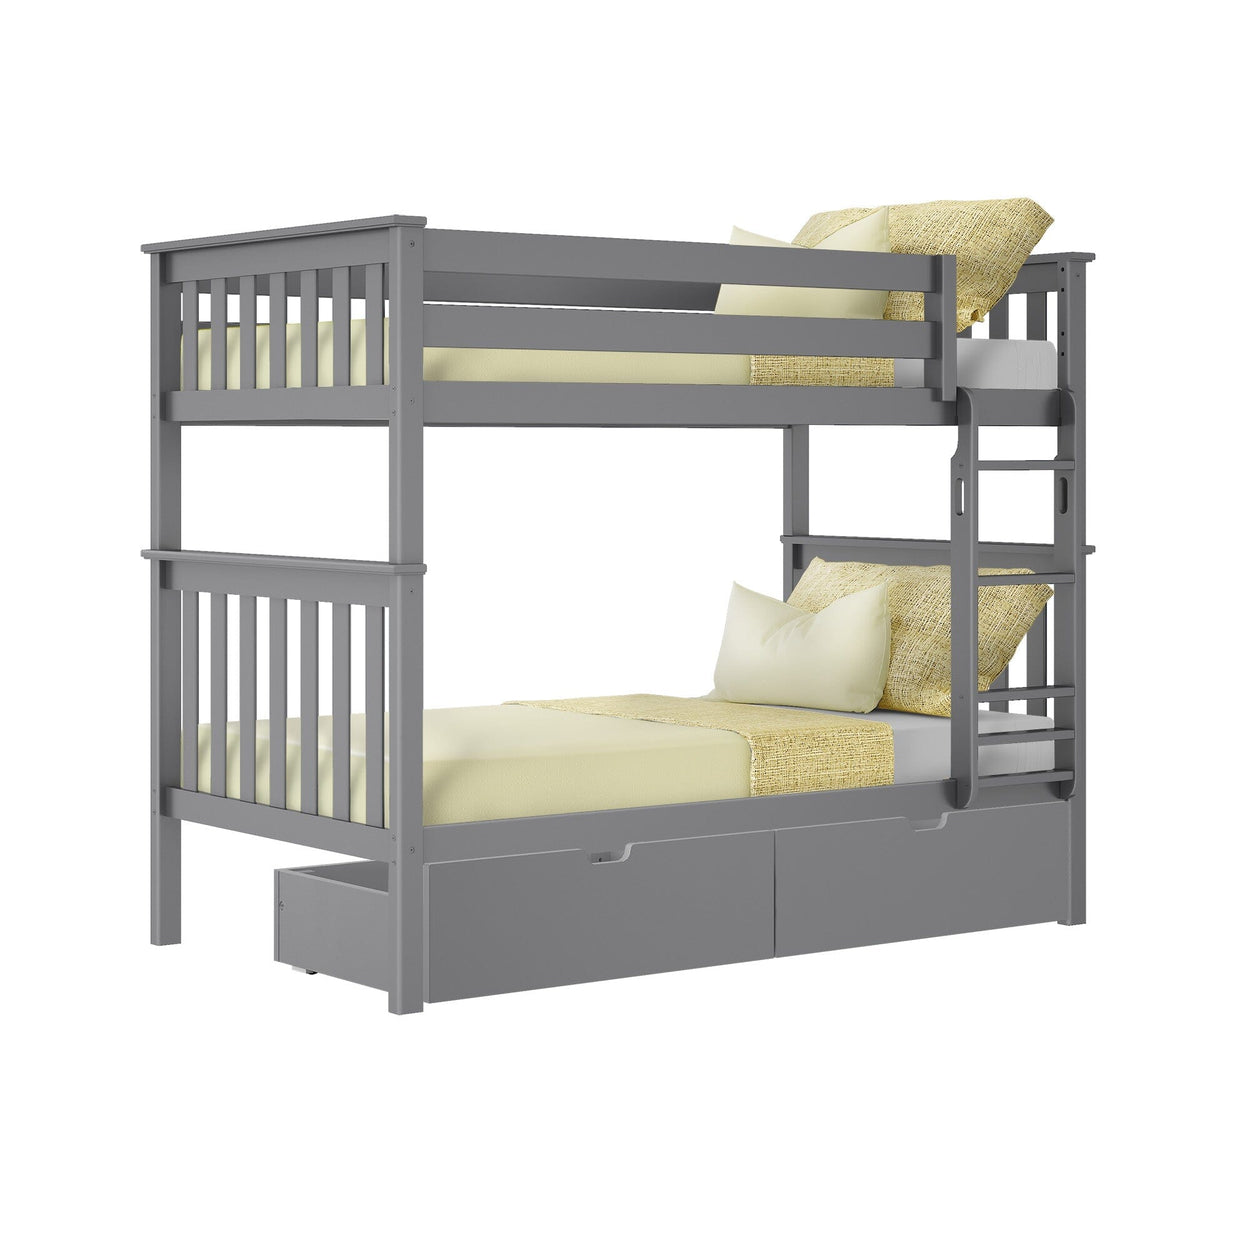 187201-121 : Bunk Beds Twin Bunk Bed With Underbed Storage Drawers, Grey